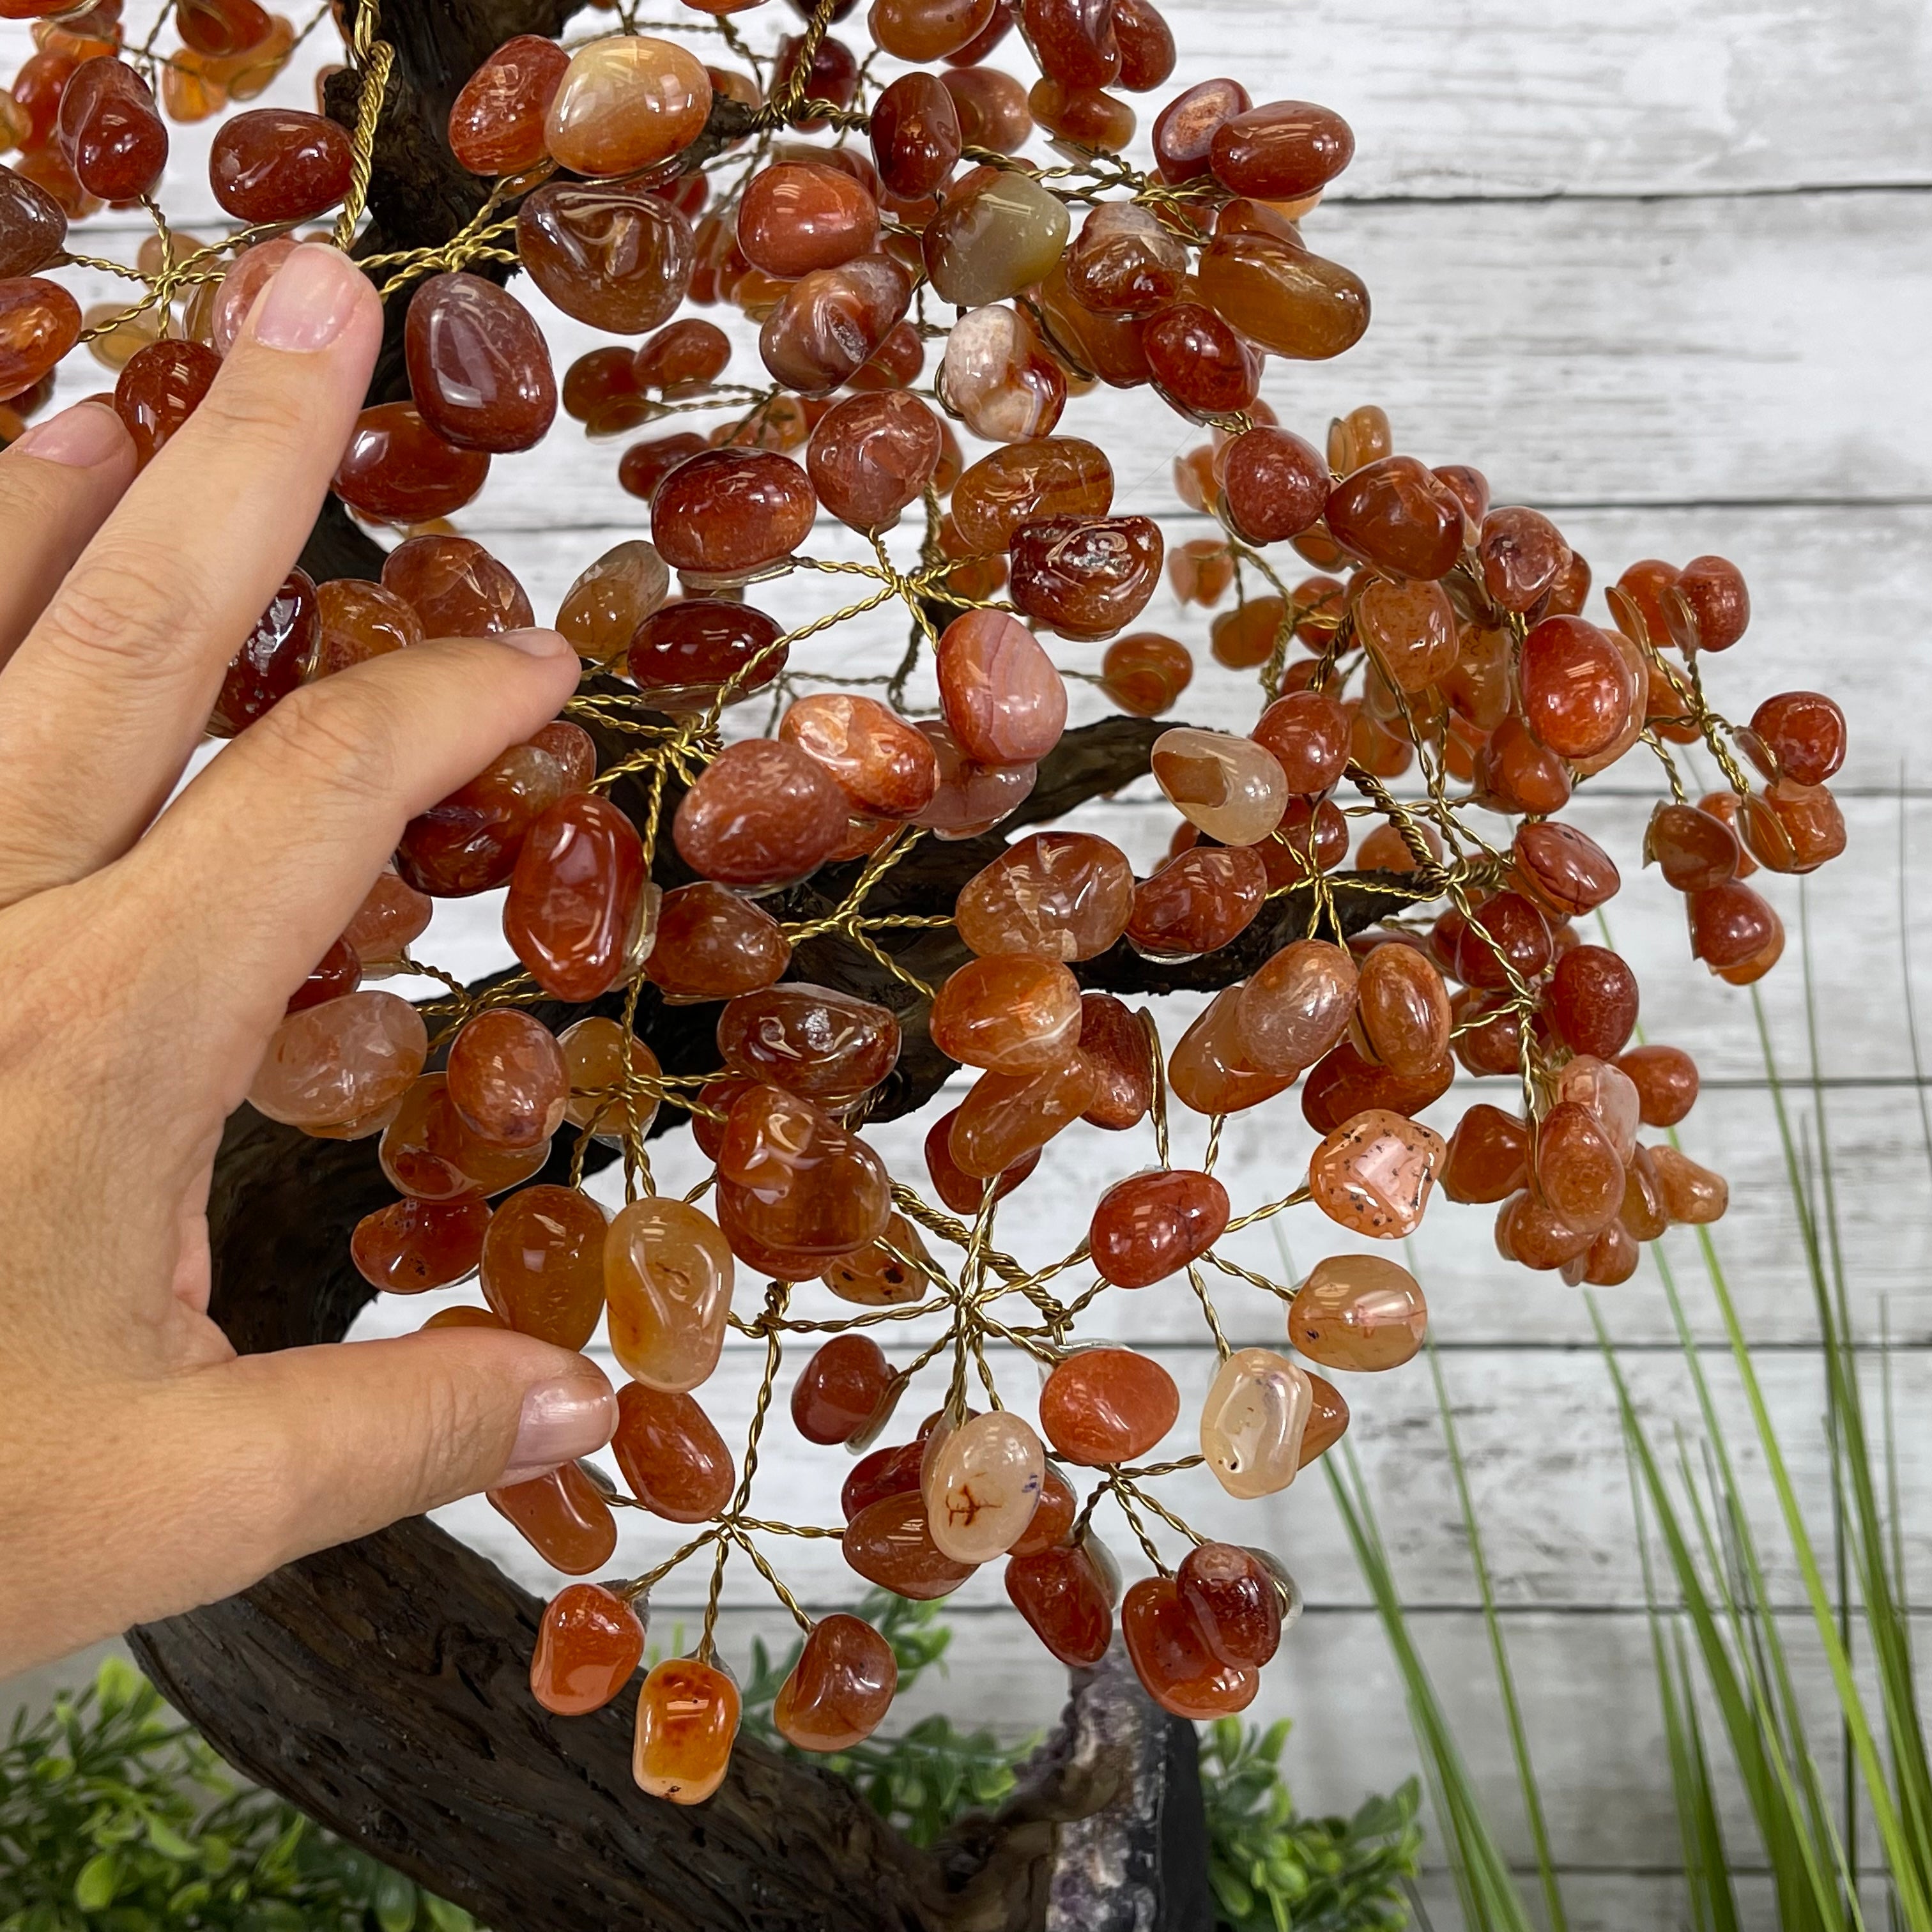 A hand reaching for a handmade Carnelian gemstone tree with red and orange gemstones